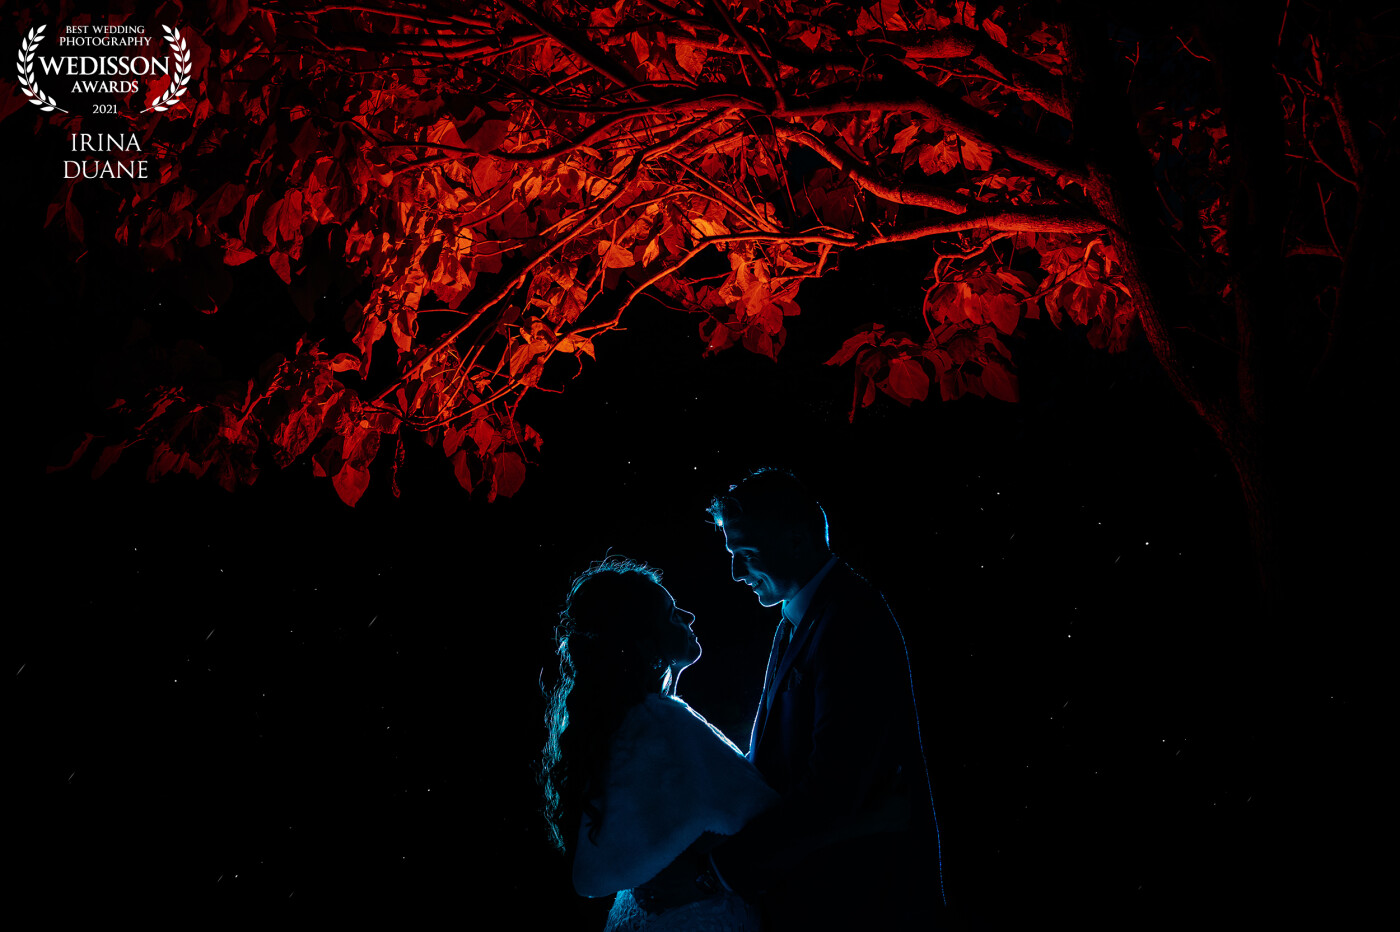 I use two speedlights. Blue gel with grid behind the couple for rim light and red gel and sphere pointed into the tree. Great technique for this time of the year when it's get dark early and you want provide your couples with a few creative shots.